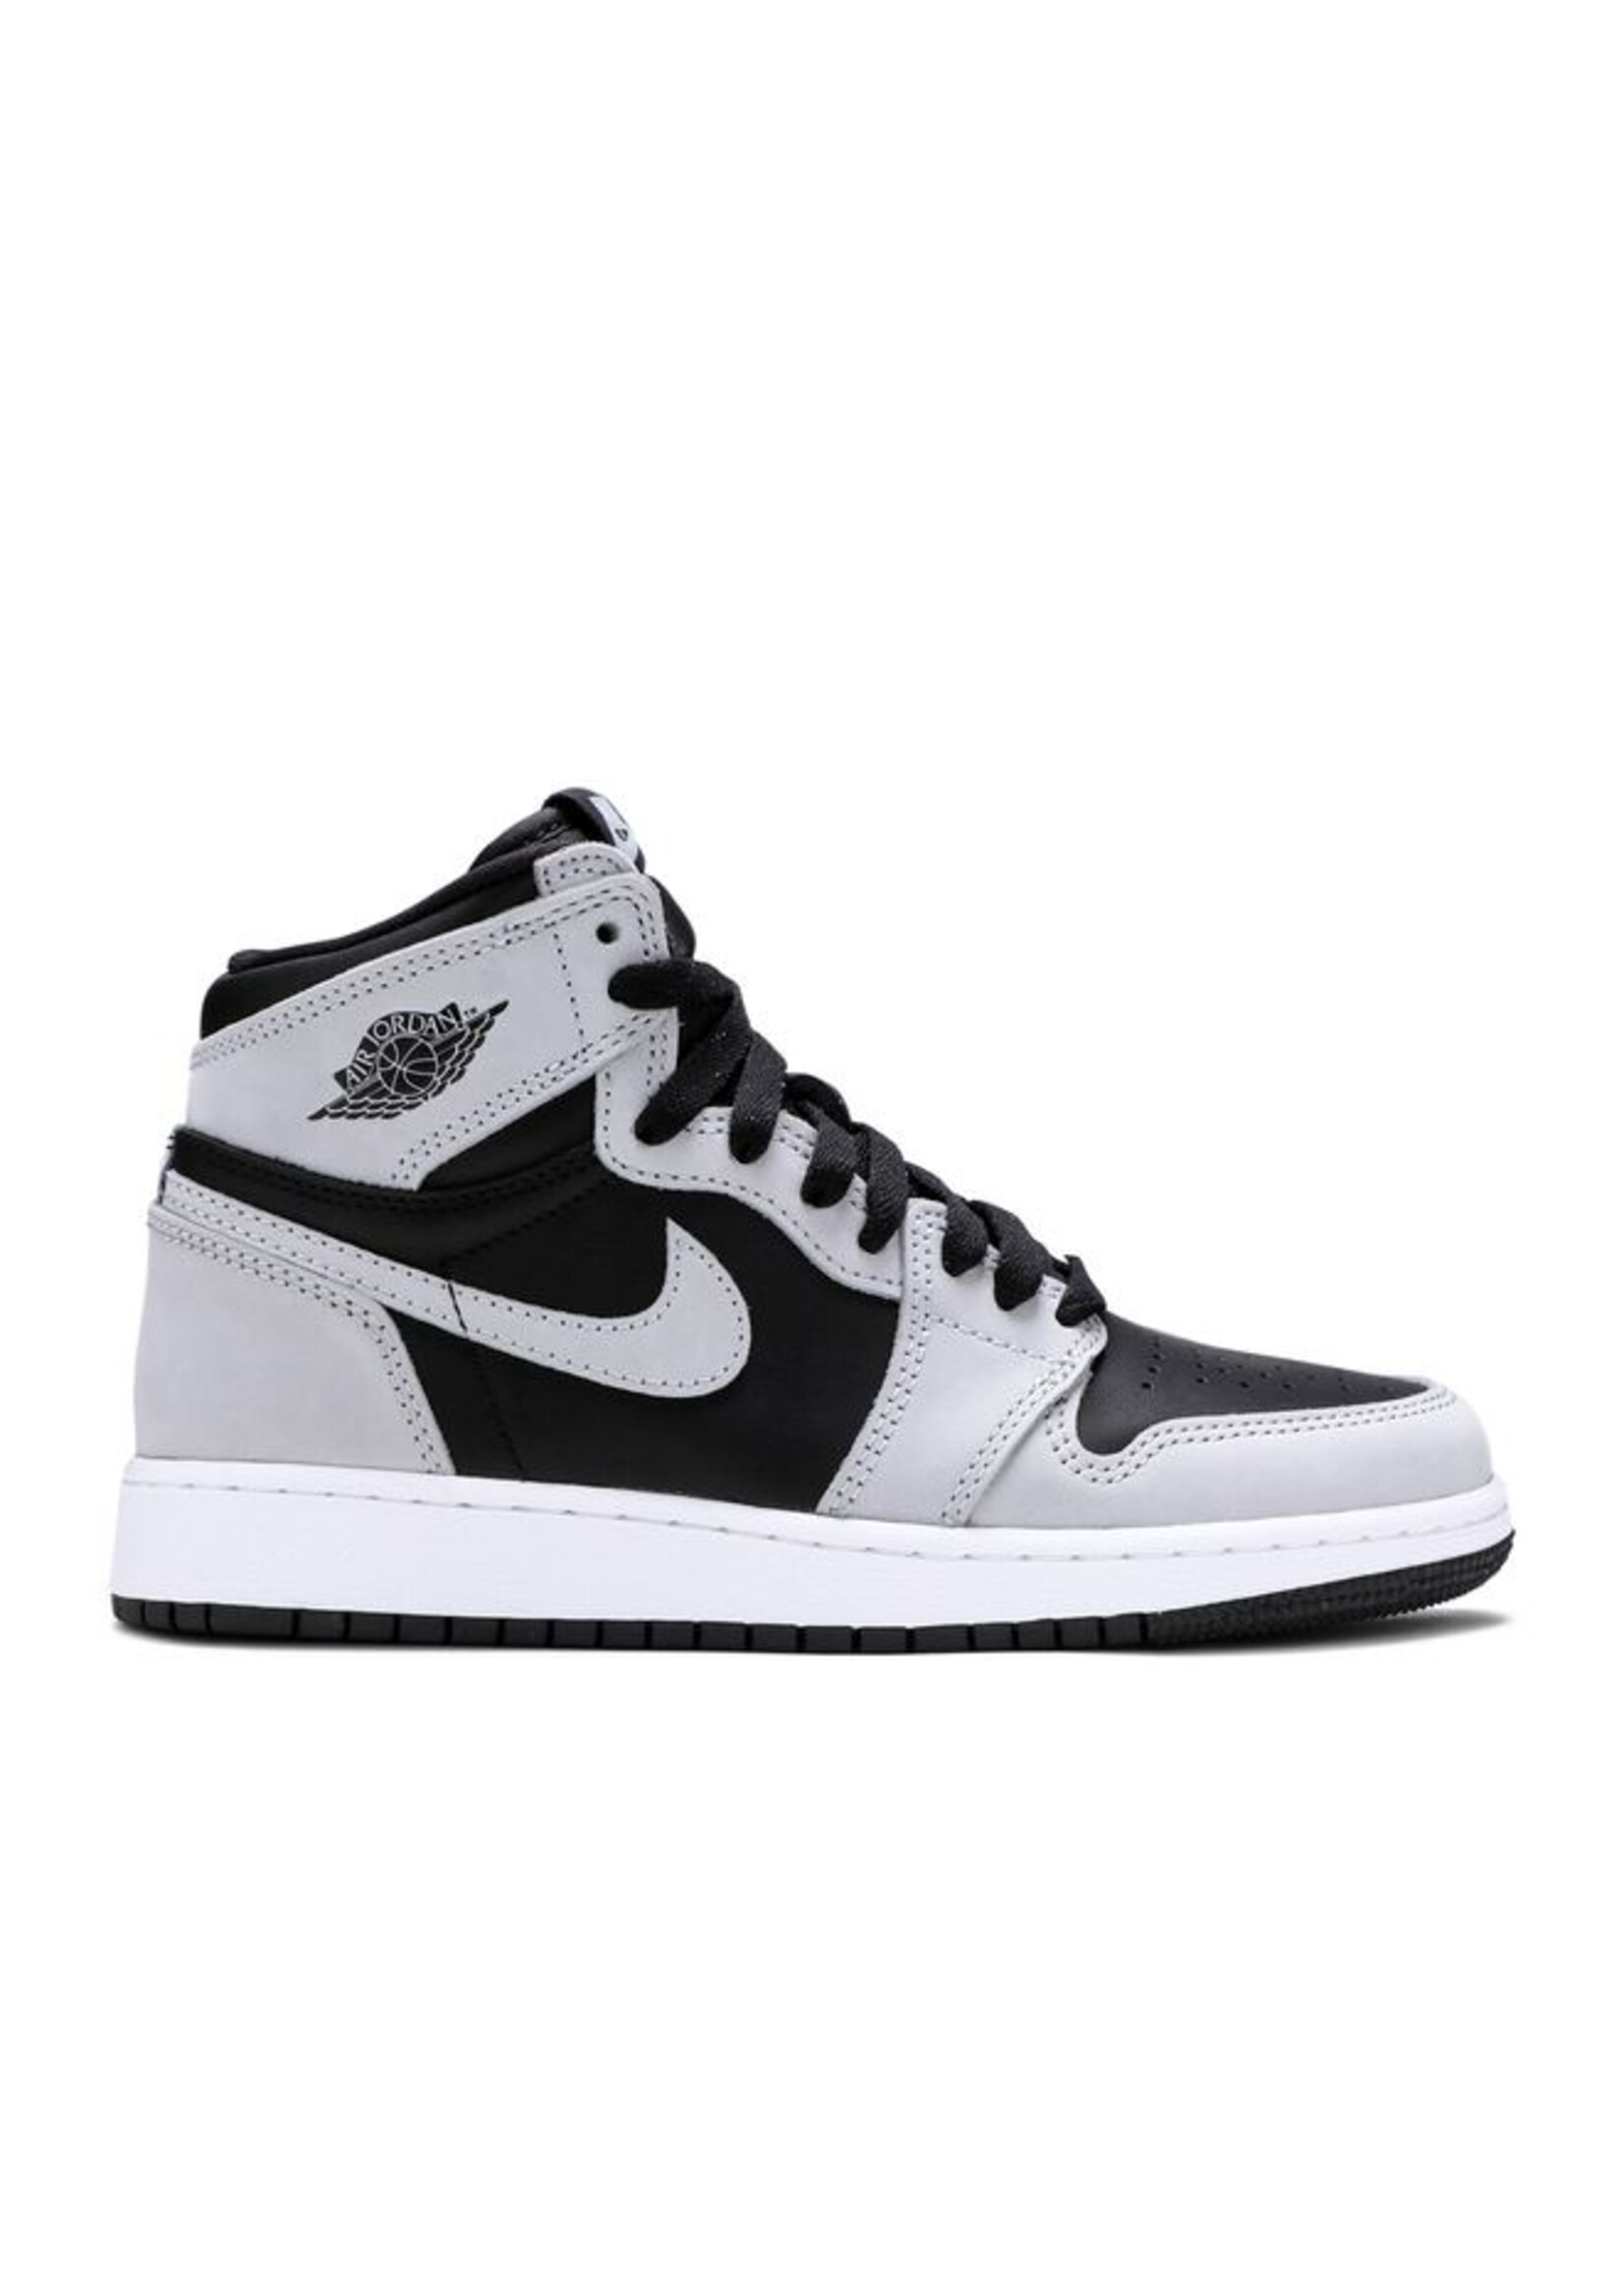 Jordan 1 Shadow 2.0 (GS) - Sole and Laces